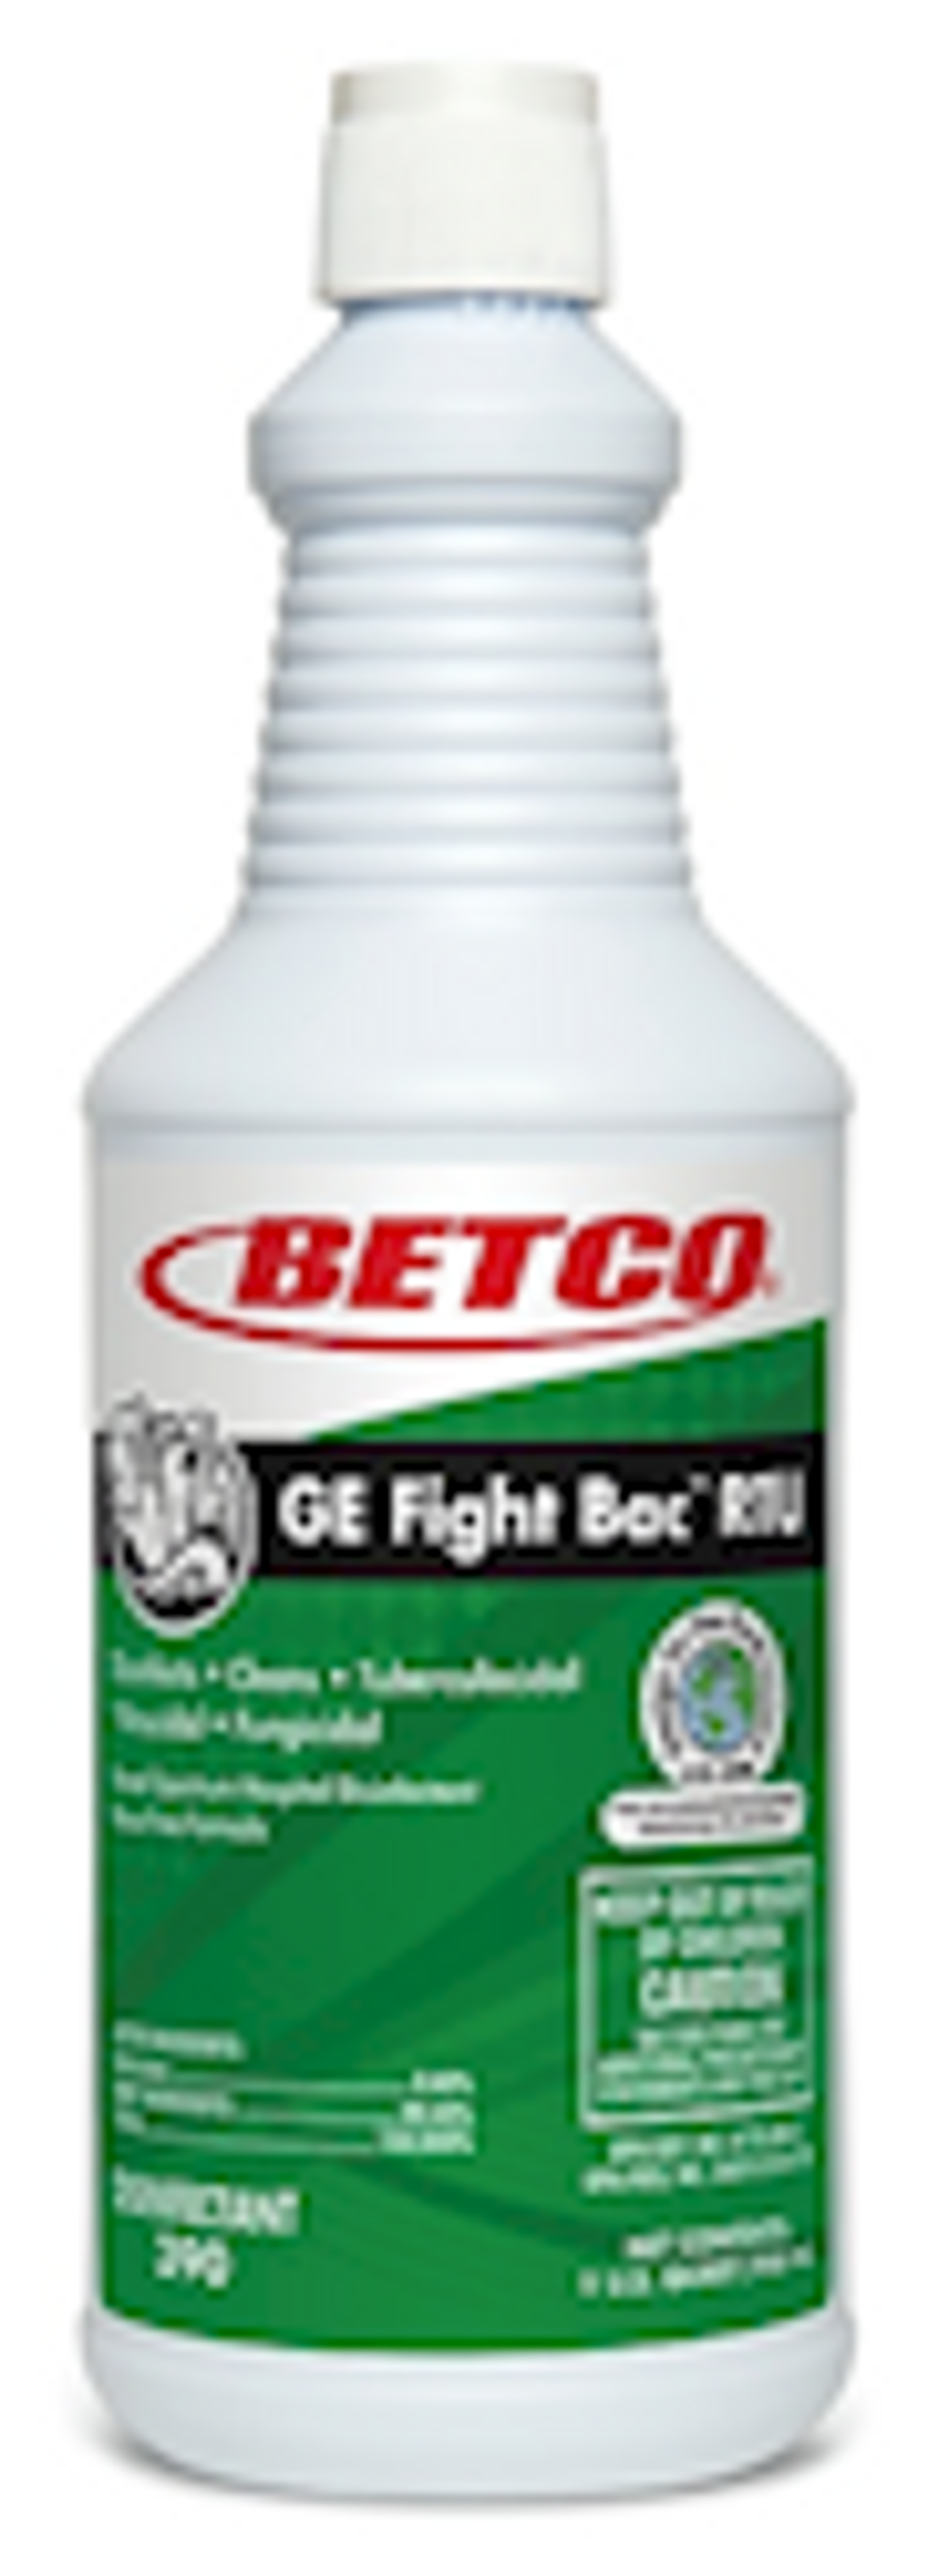 DISINFECTANT, GE FIGHT BAC, BETCO, FRESH SCENT